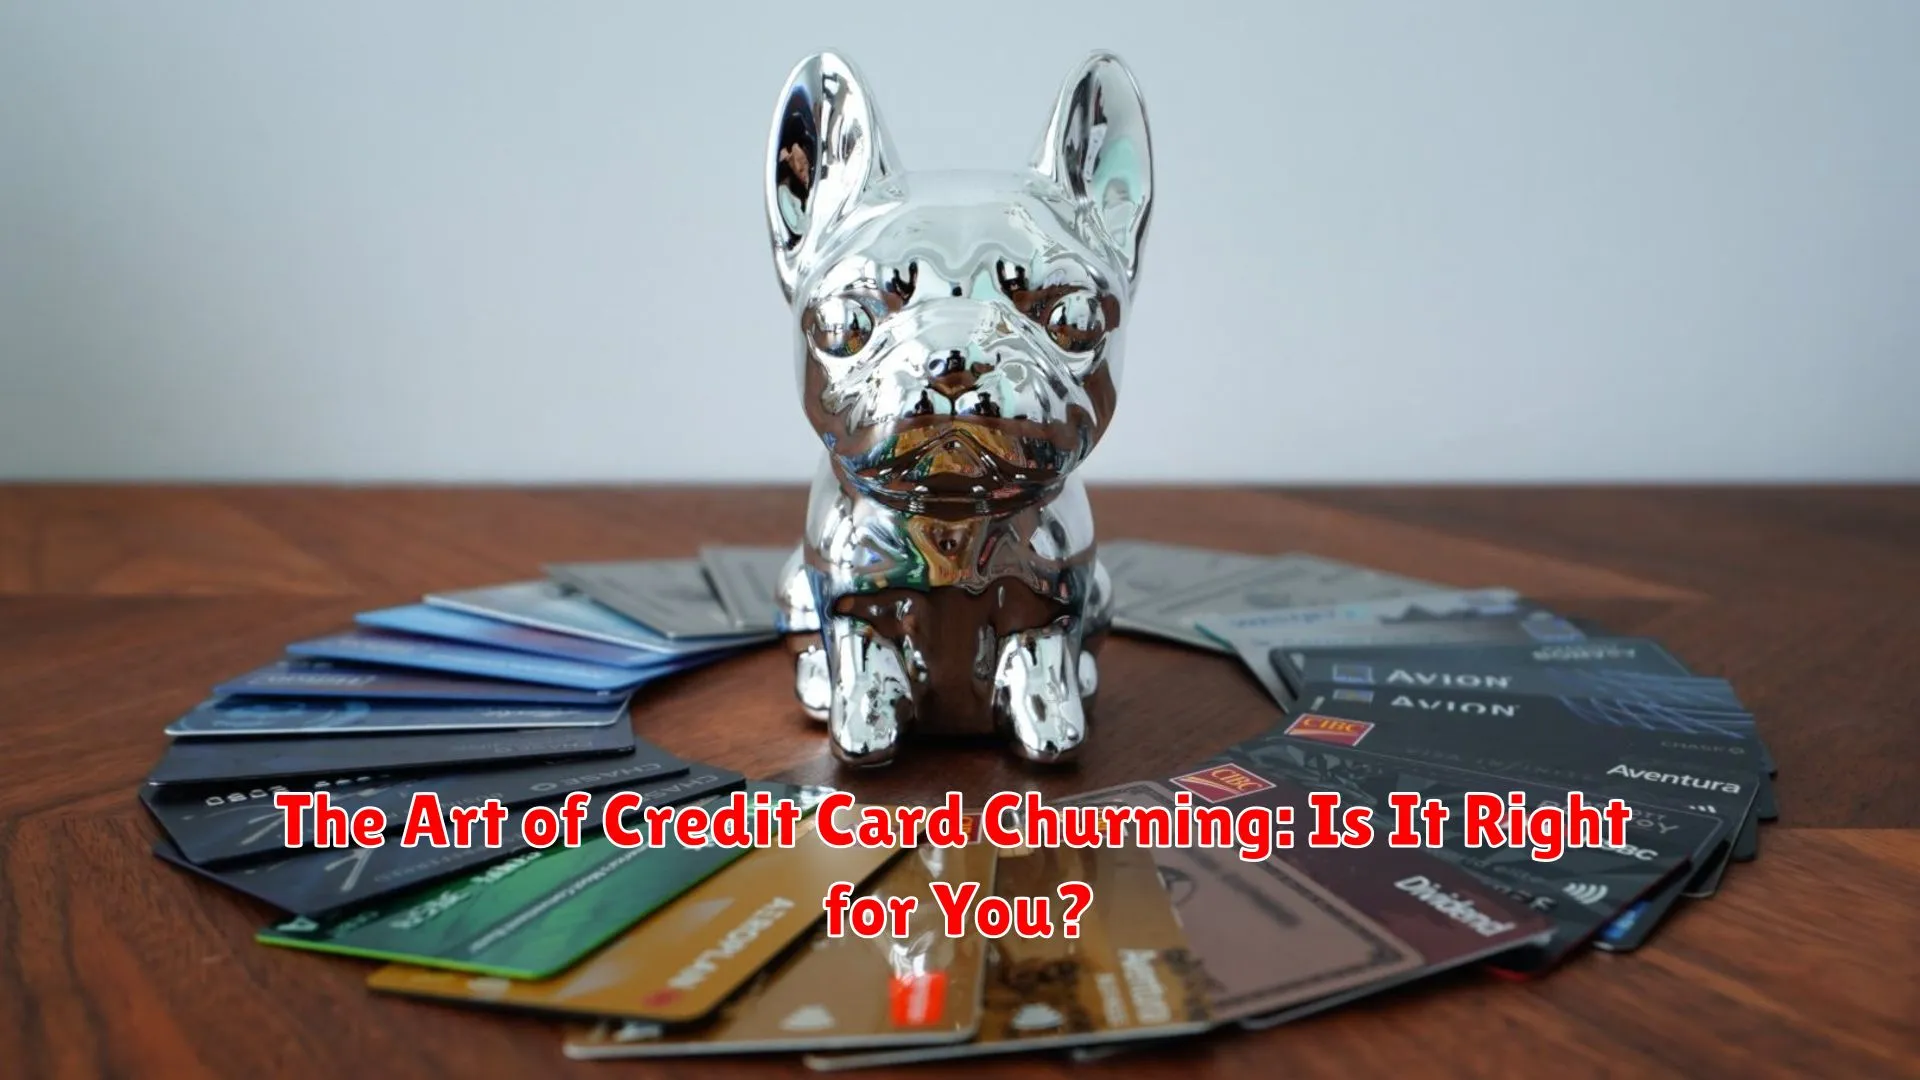 The Art of Credit Card Churning: Is It Right for You?